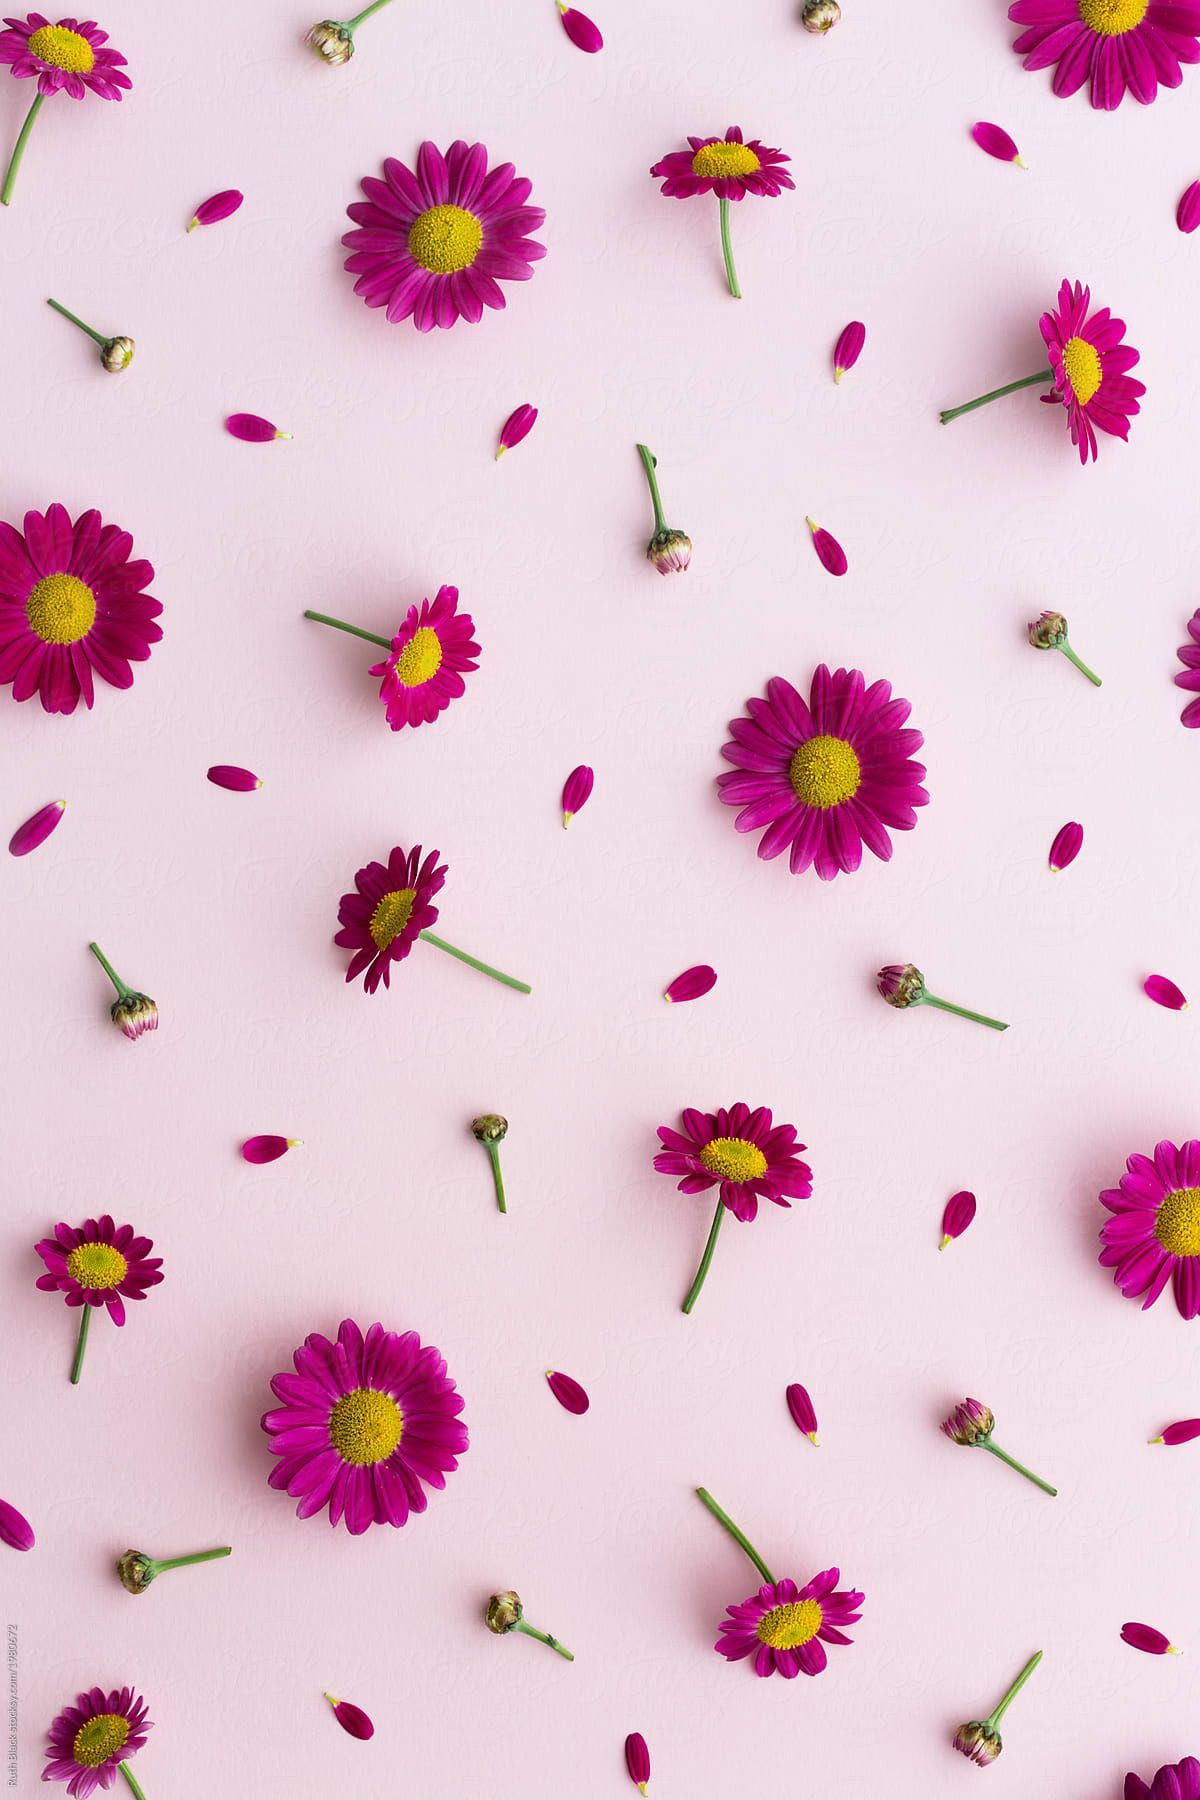 Pink Daisy Background Download This High Resolution By Ruth Black From. Papel De Parede Flores, Papel De Parede Cor De Rosa, Papel De Parede Wallpaper